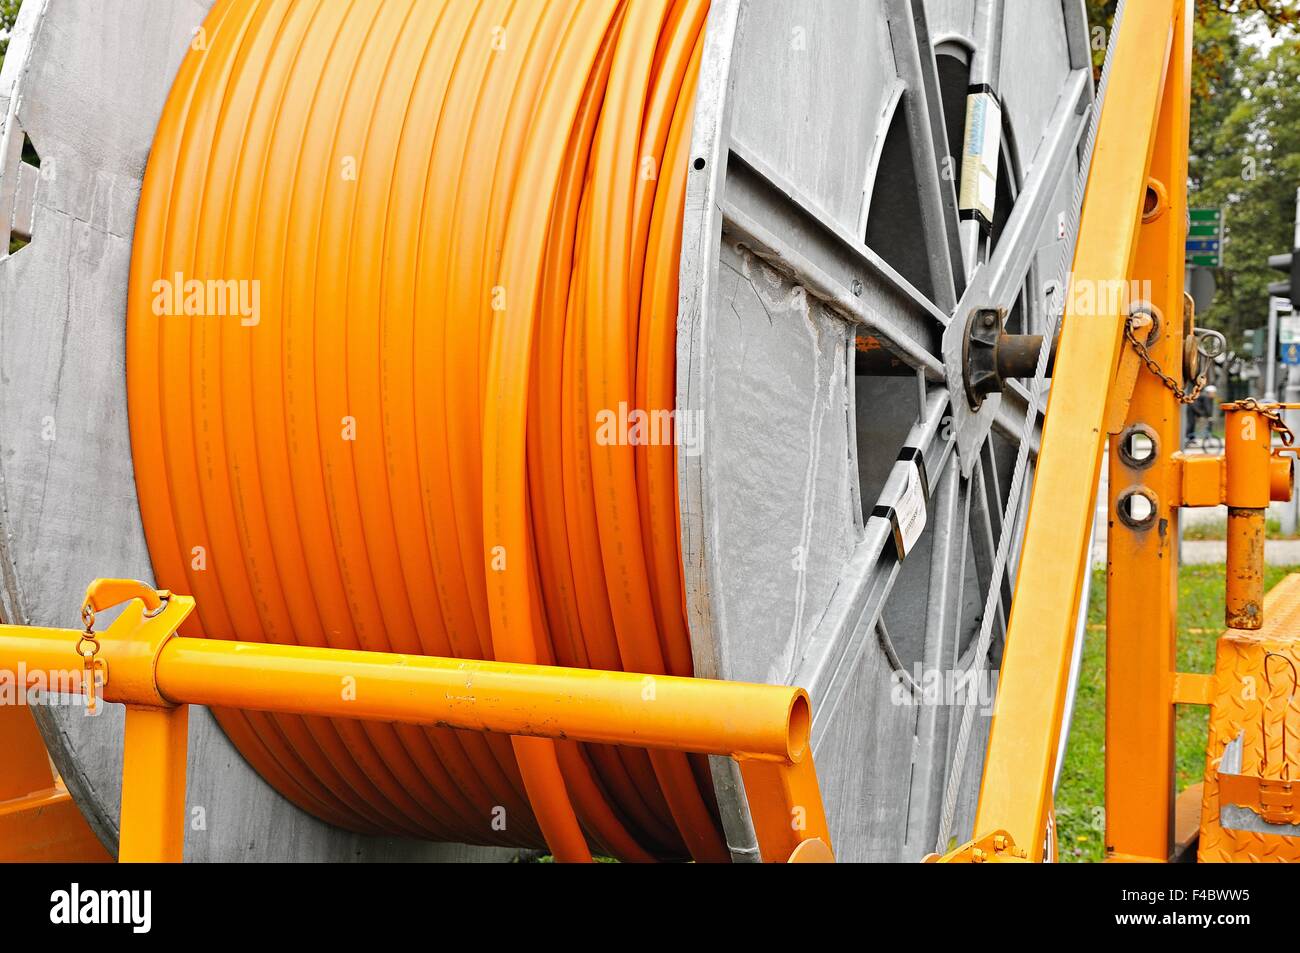 Laying trailer with broadband cable drum Stock Photo